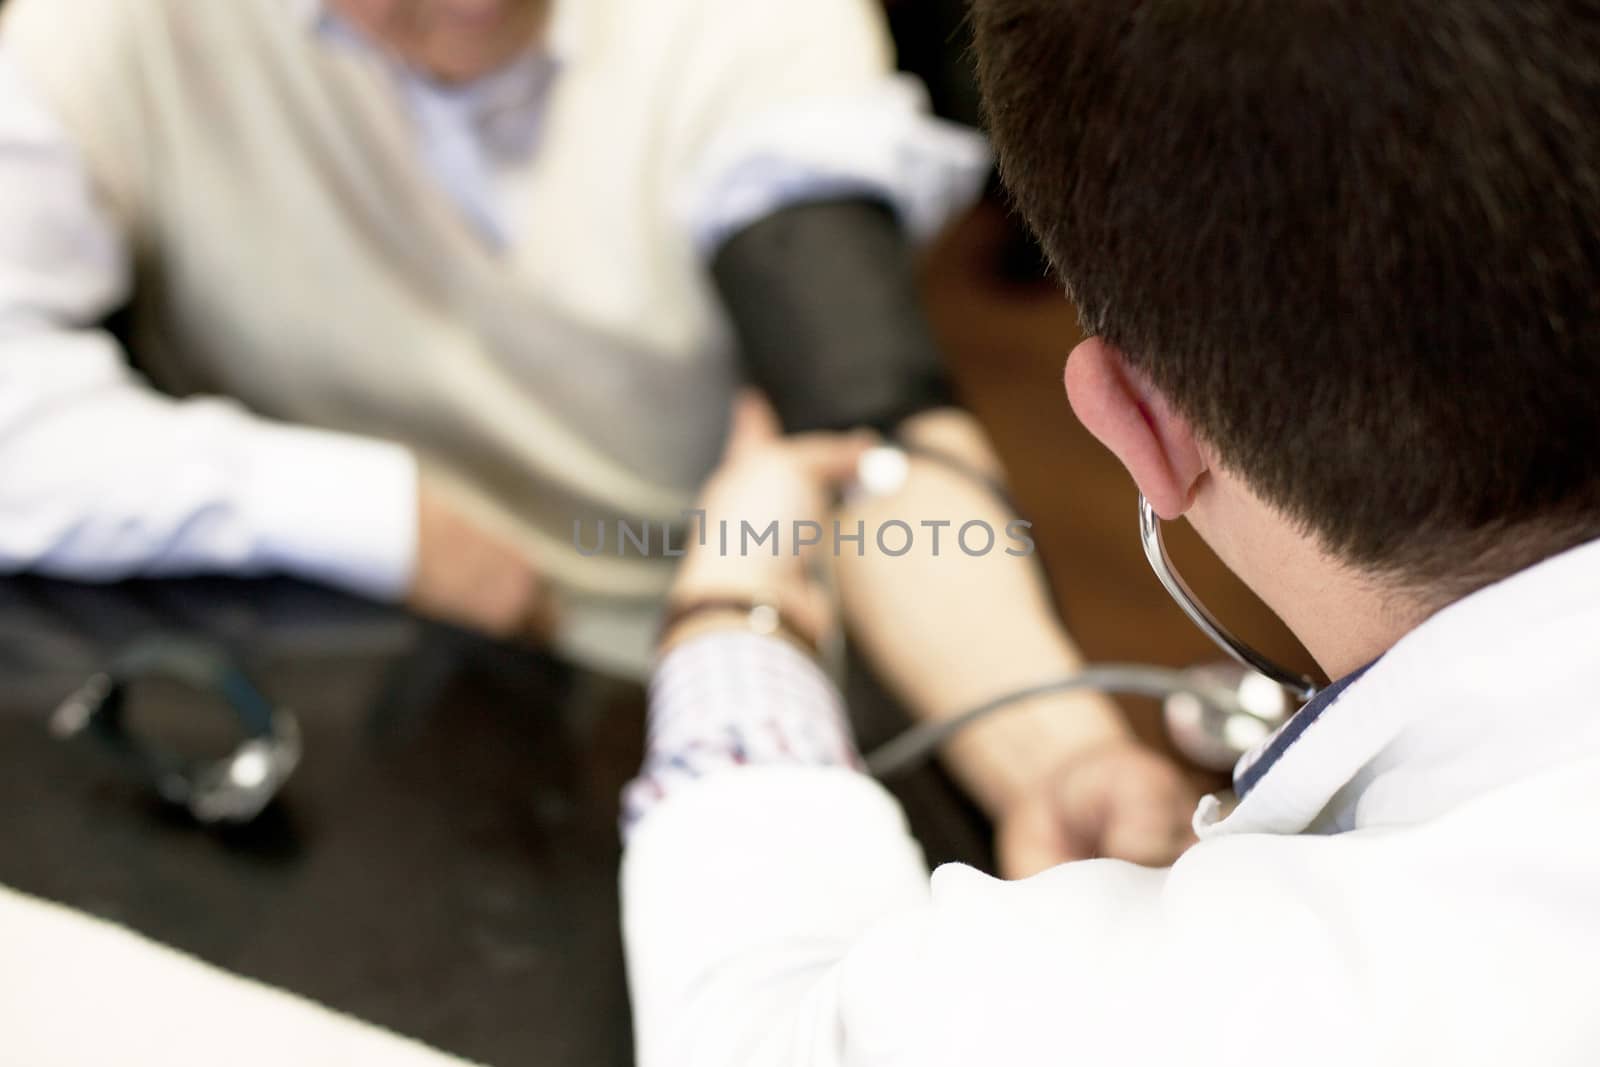 Measuring blood pressure by wellphoto